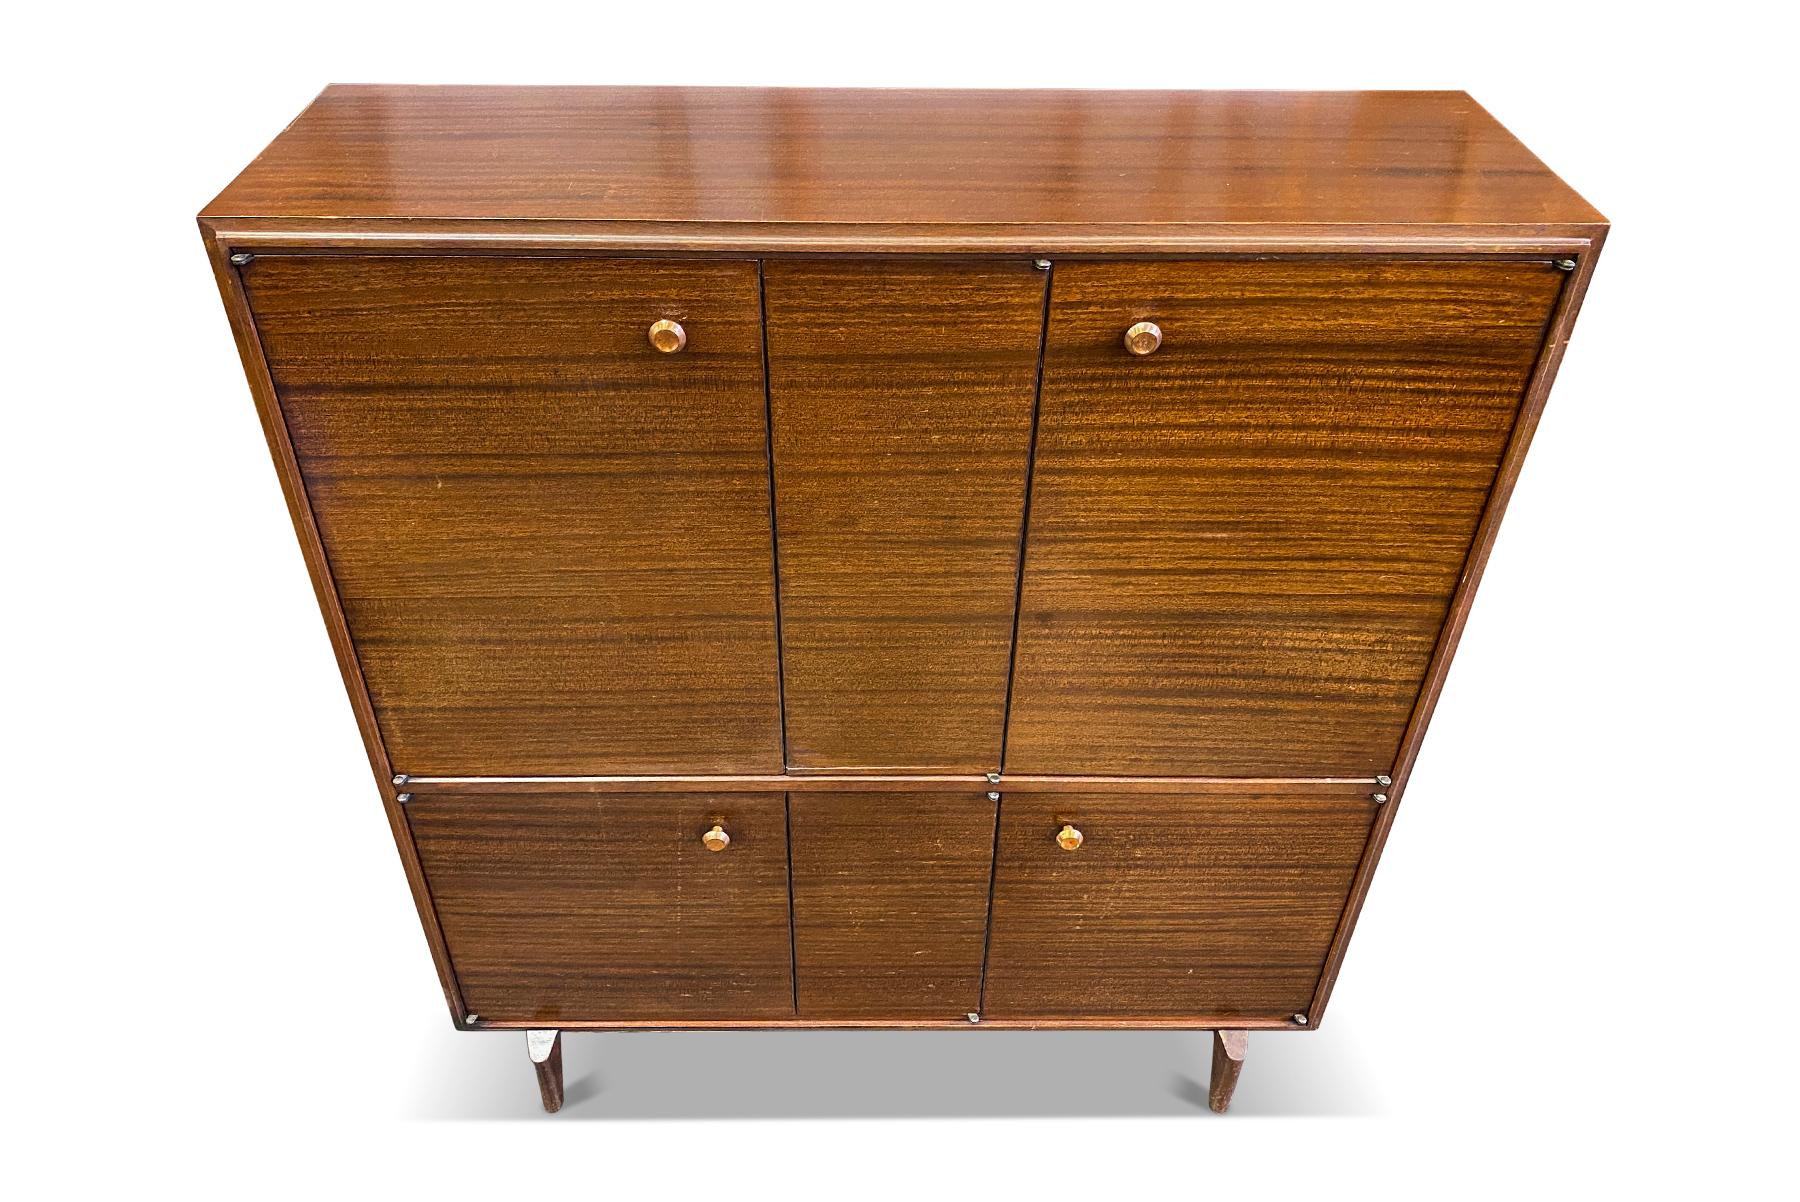 Origin: England
Designer: Robert Heritage
Manufacturer: Beaver + Tapley
Era: 1960s
Dimensions: 36? wide x 11? deep x 40? tall

Restoration includes:
• Structural + joint repair (if necessary) on all joints
• Full exterior refinish in lacquer